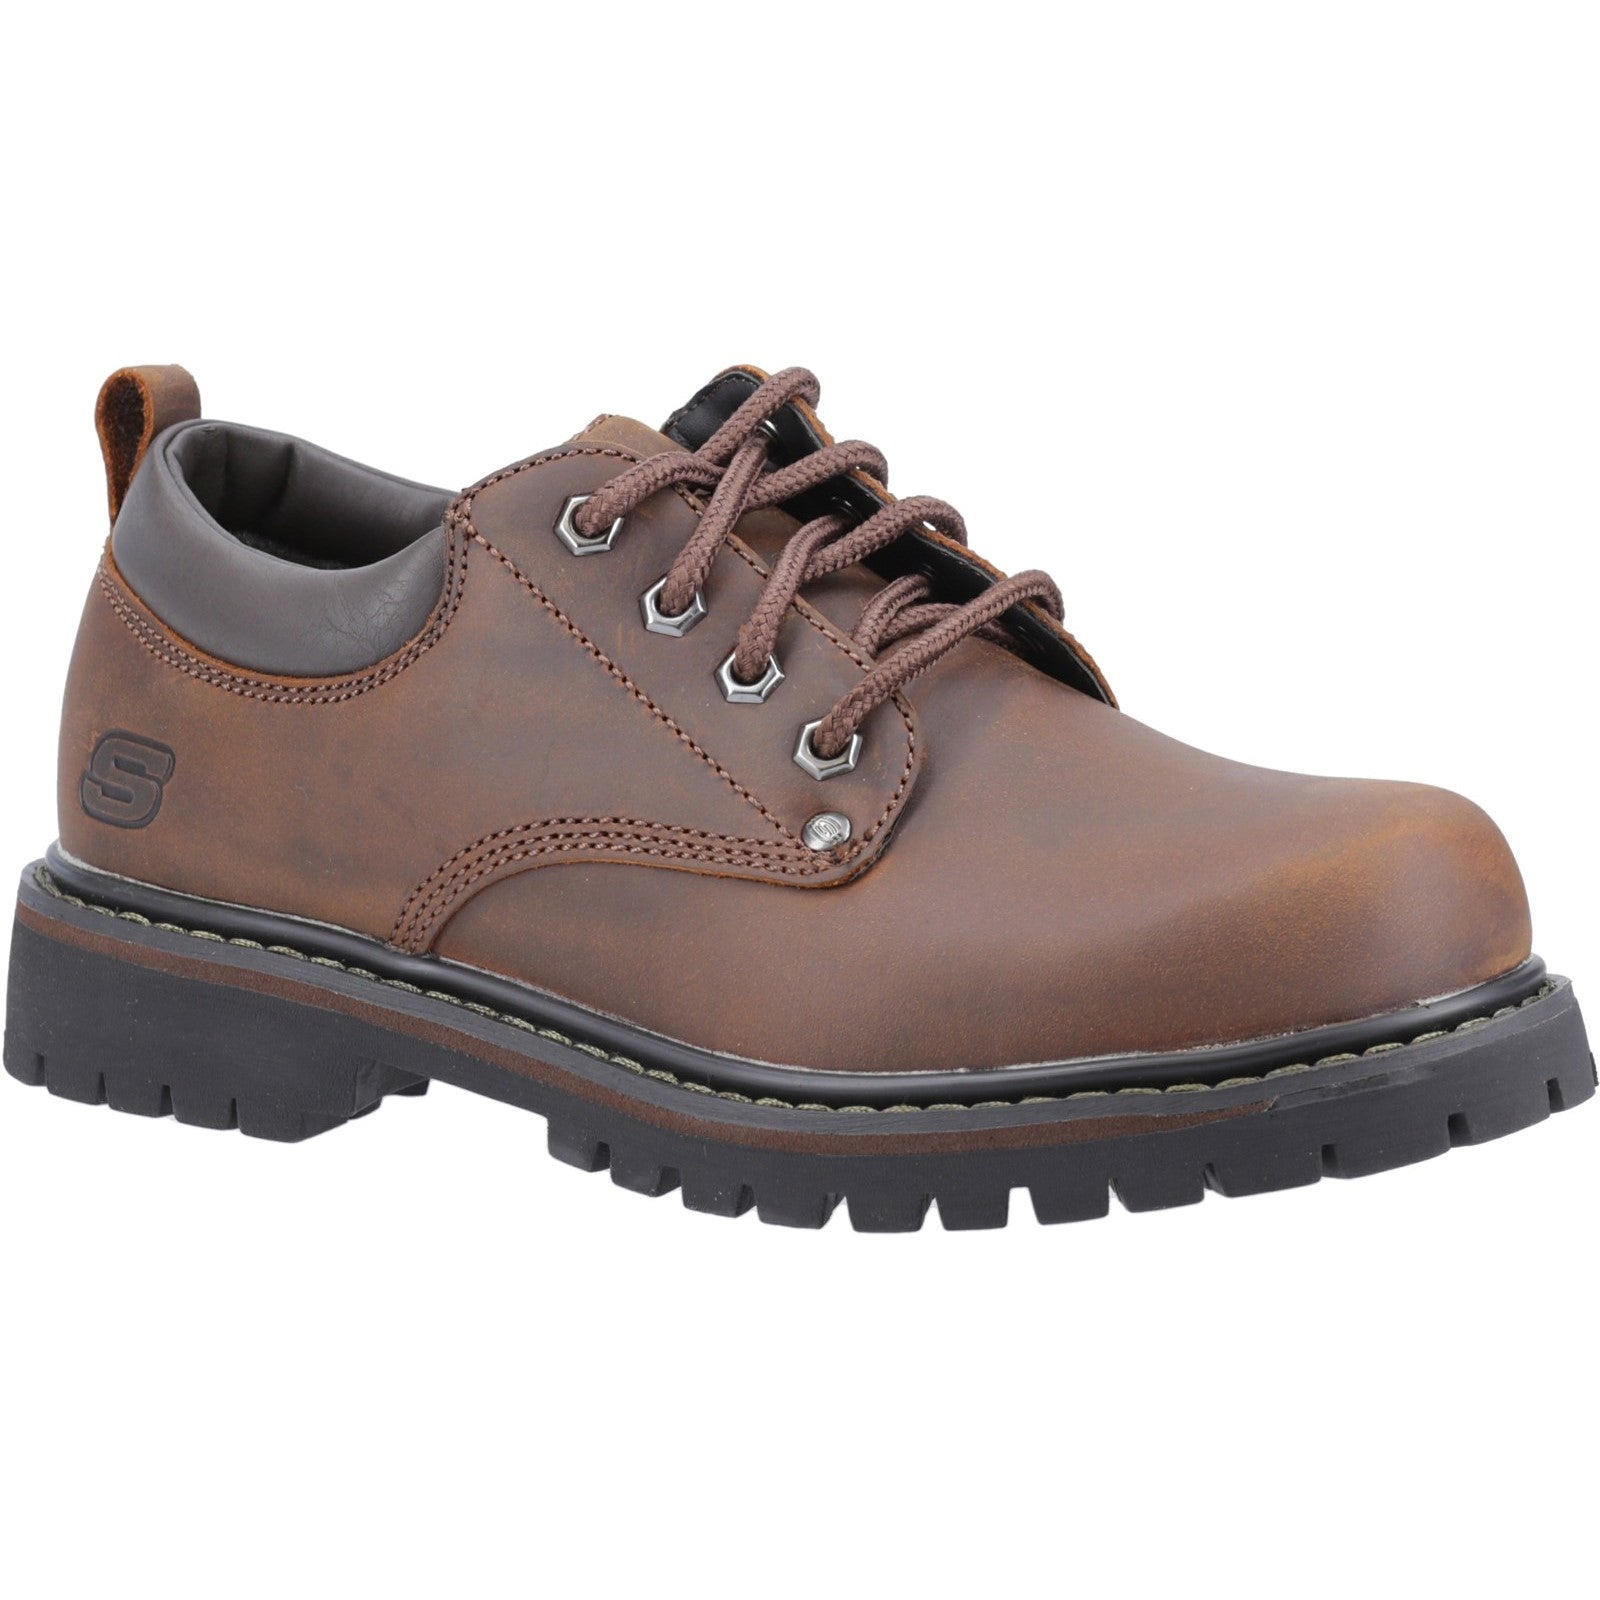 Skechers Tom Cats dark brown leather casual Oxford lace up shoe #SK6618